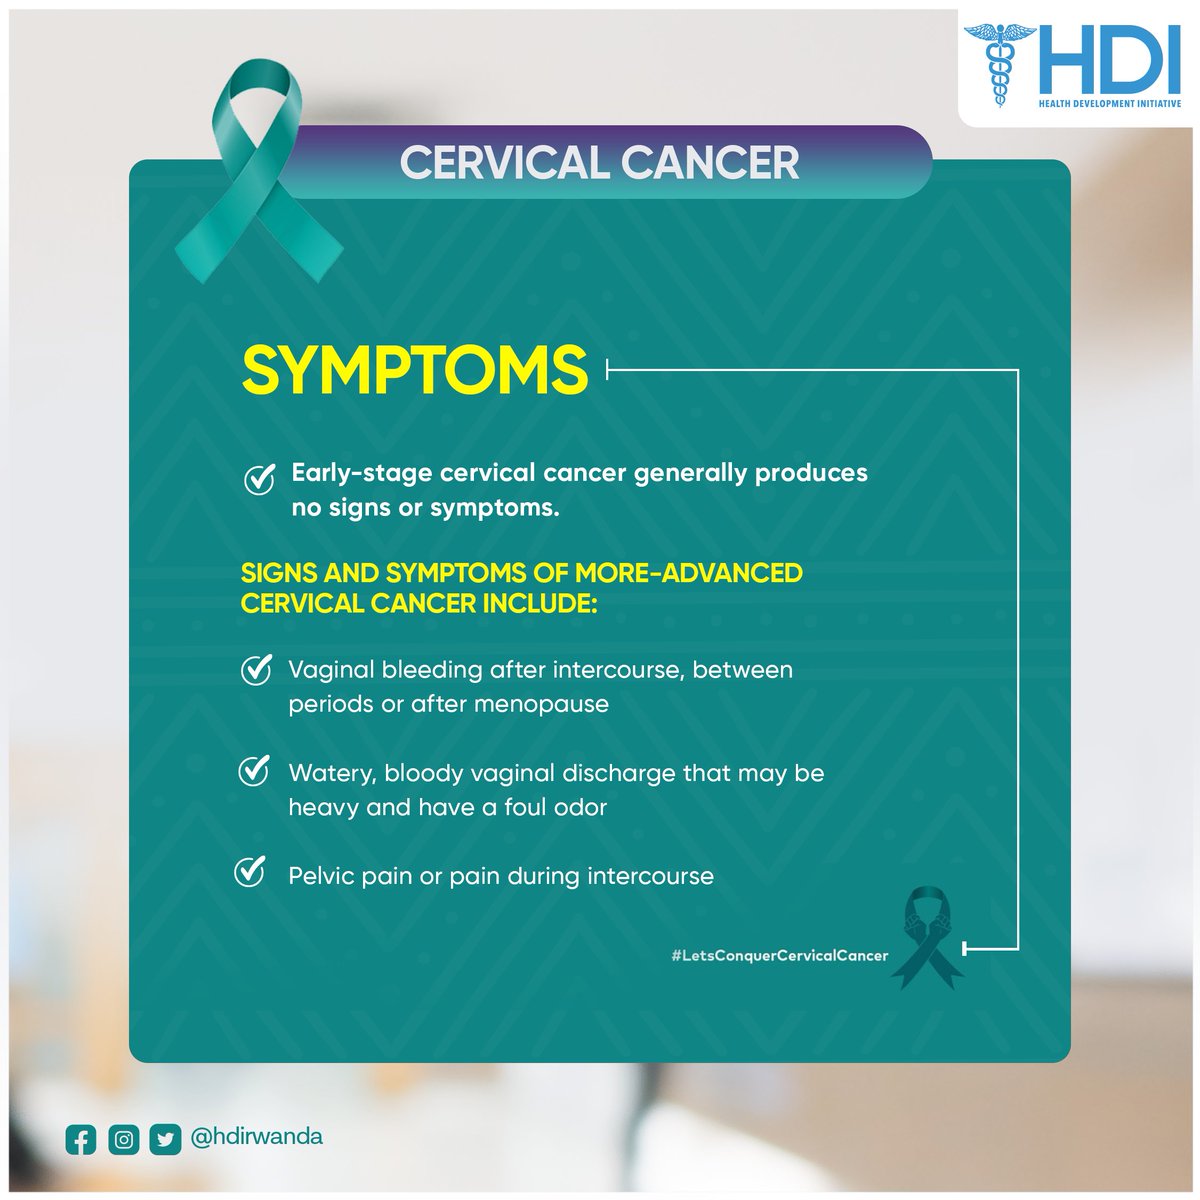 HDI Rwanda on X: Early stages of cervical cancer don't usually